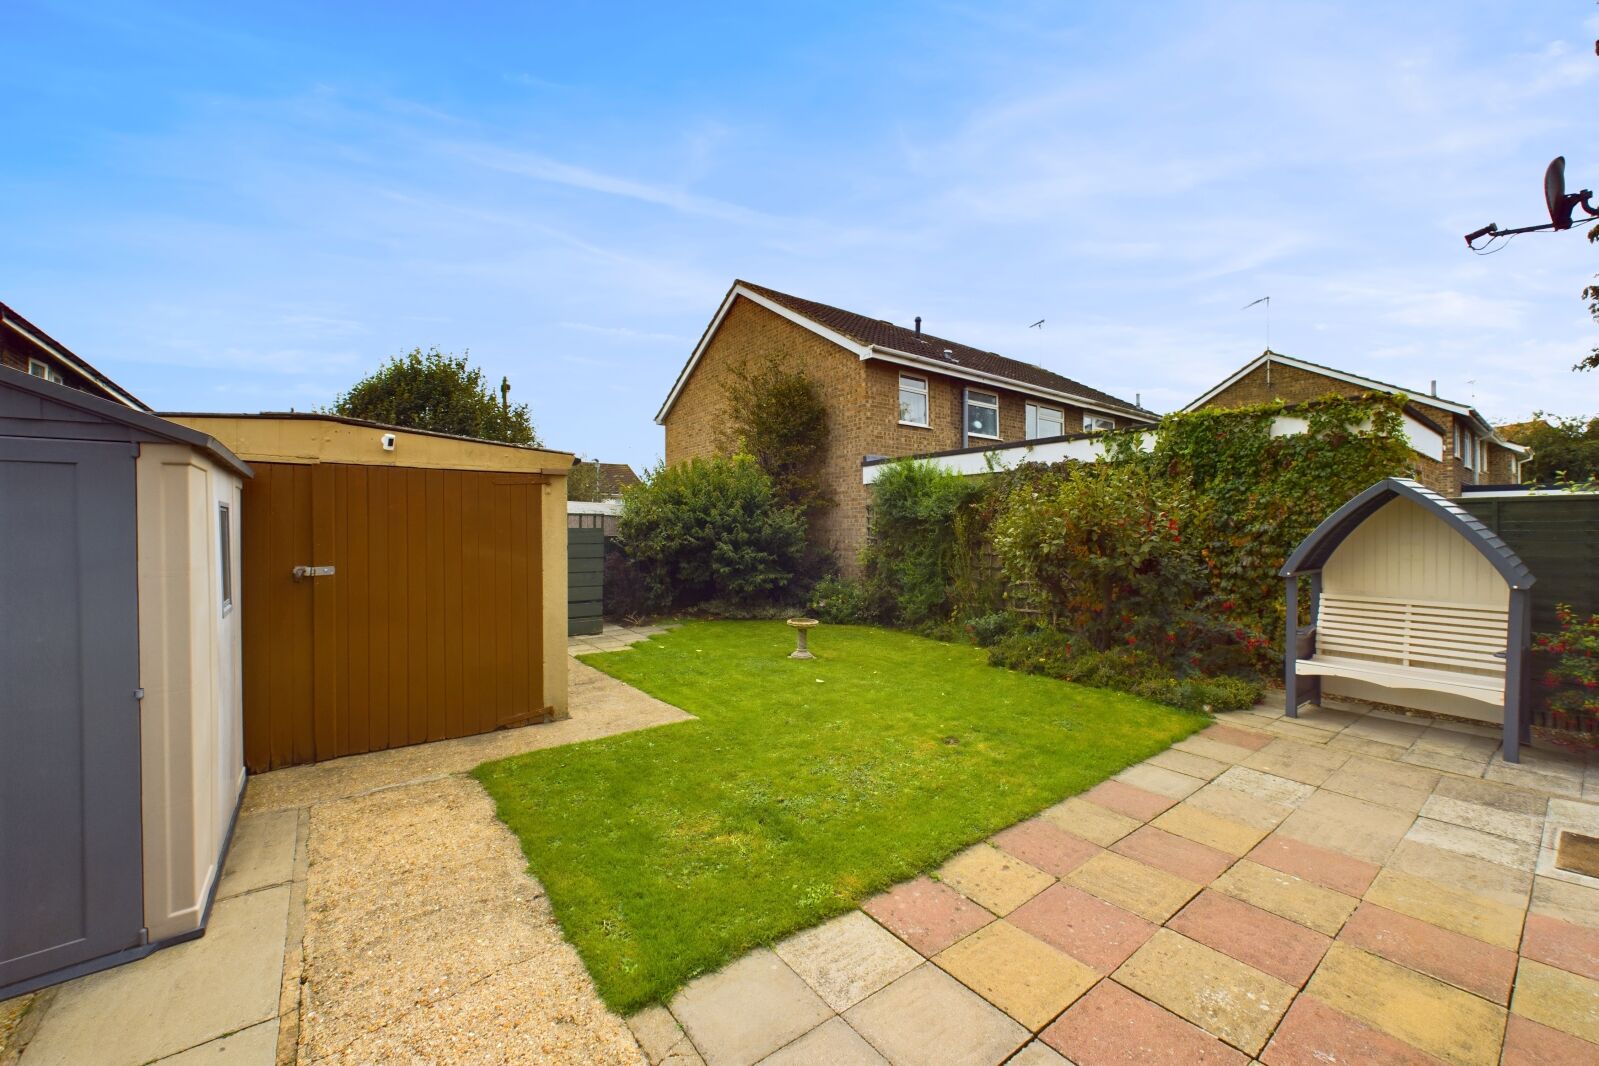 3 bedroom detached house for sale Woodfield Drive, Sawtry, PE28, main image